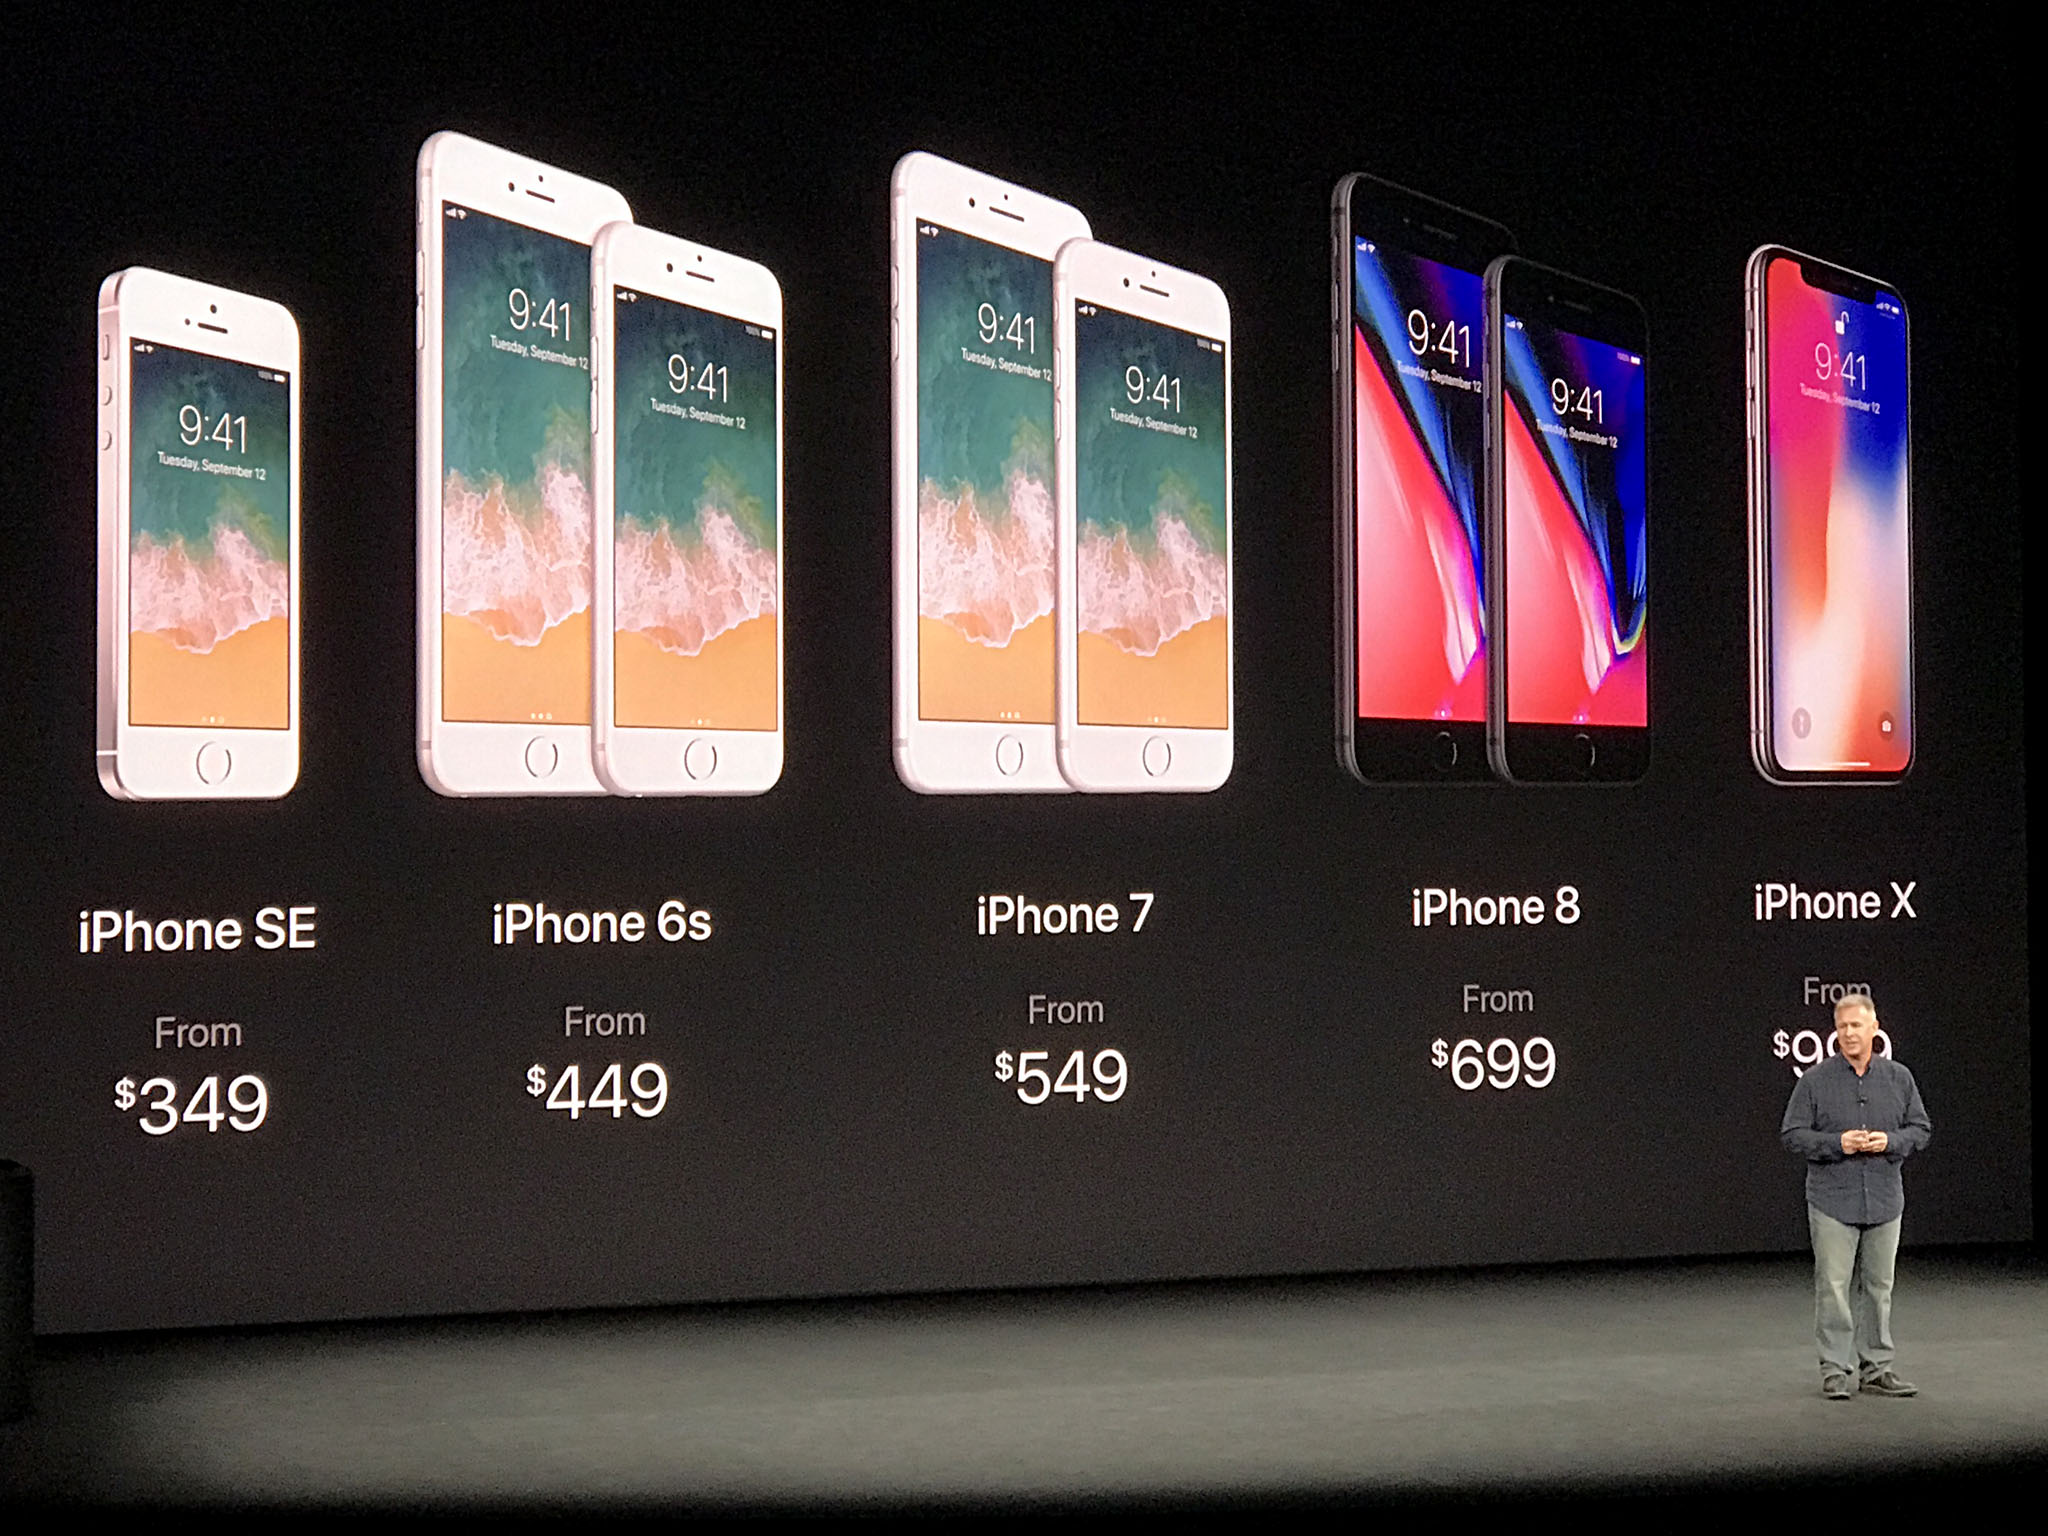 Lineup of iPhones at Apple Event